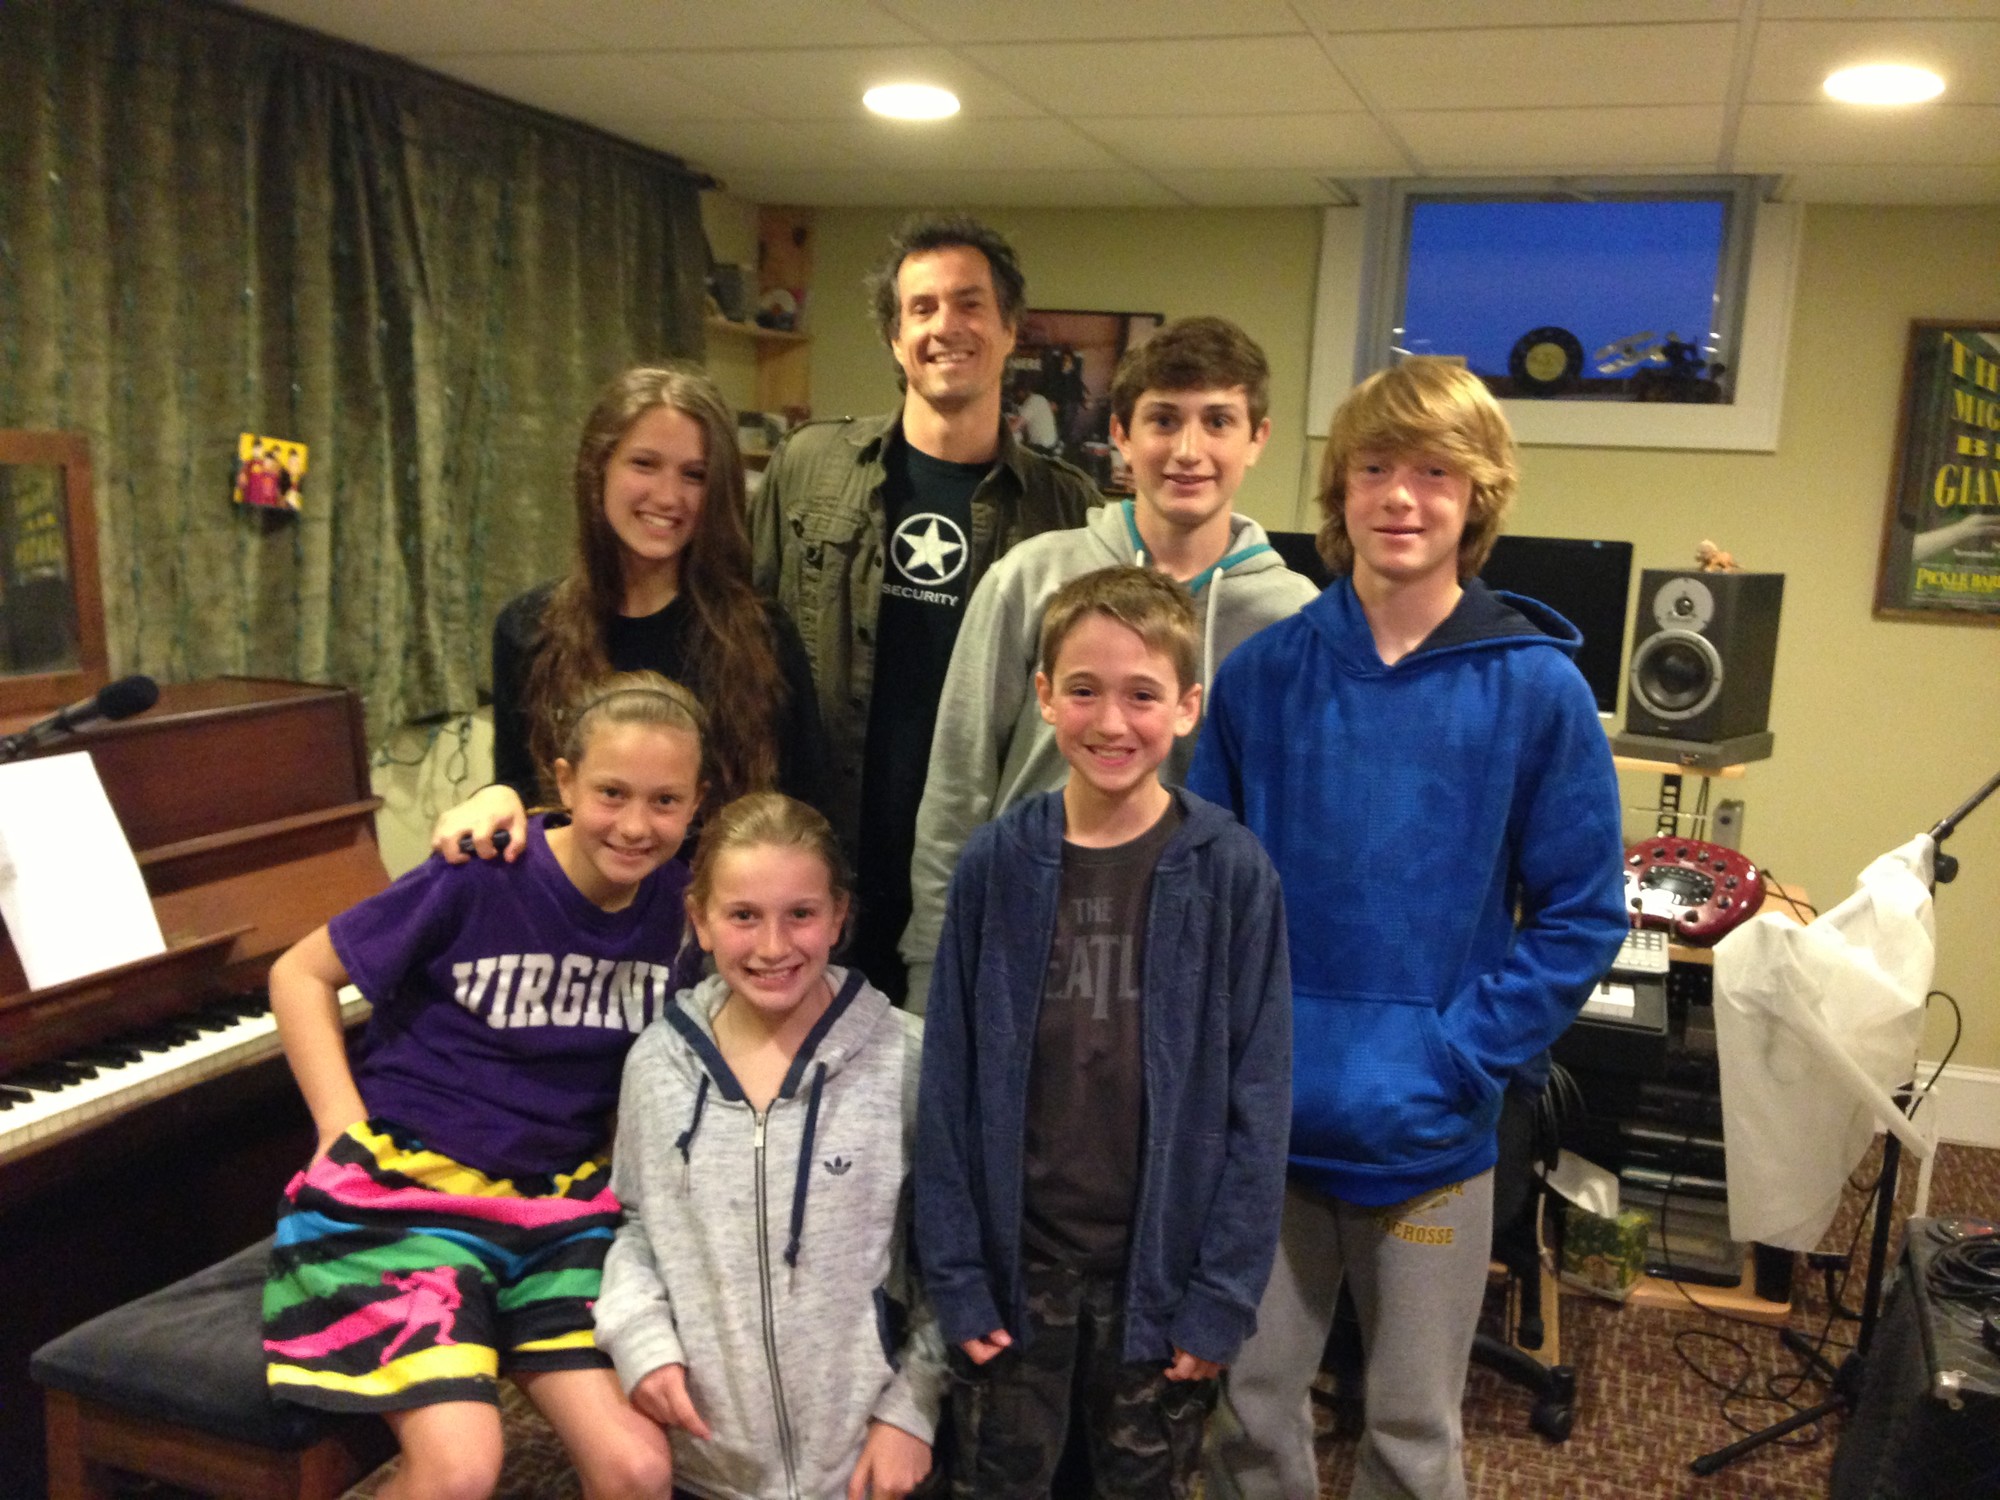 Danny Weinkauf recruited talented kids from the neighborhood for his new album “No School Today” — including his own children. Clockwise from top were Weinkauf, Jack Sullivan, Kai Weinkauf, Randin Chiappisi, Leanna Sullivan, Lena Weinkauf and Hannah Chiappisi.